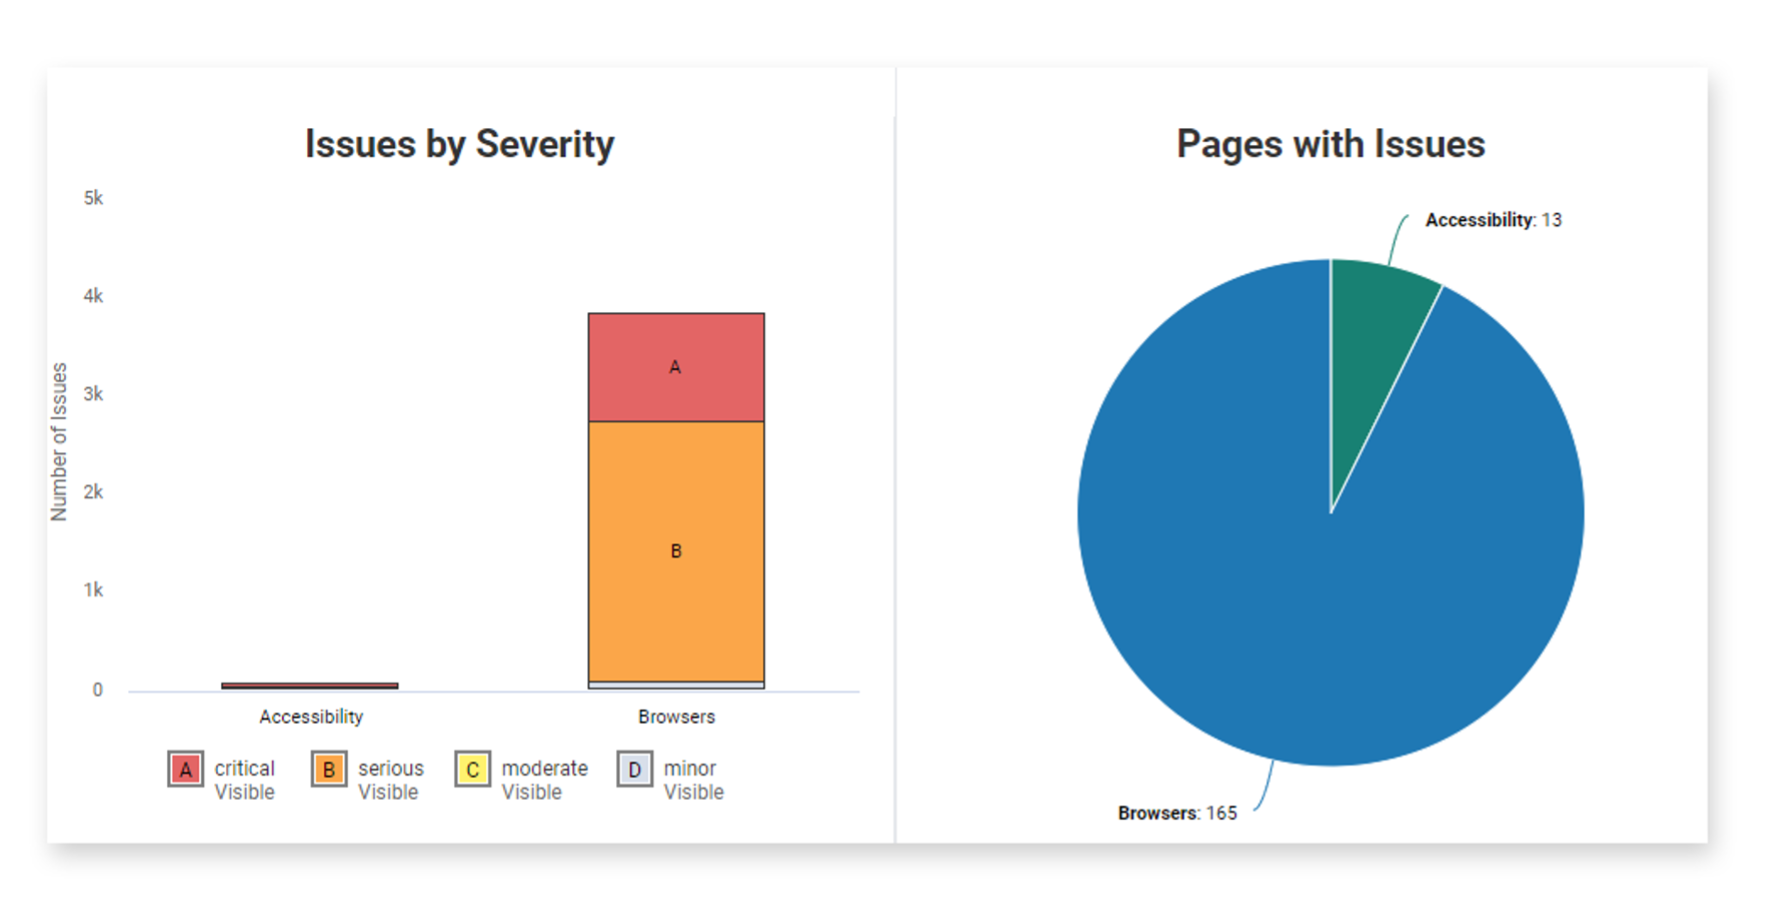 Two charts: Issues by Severity the number of critical and serious issues visible and another charter with Pages with Issues showing a pie chart with 13 Accessibility issues and 165 Browser issues